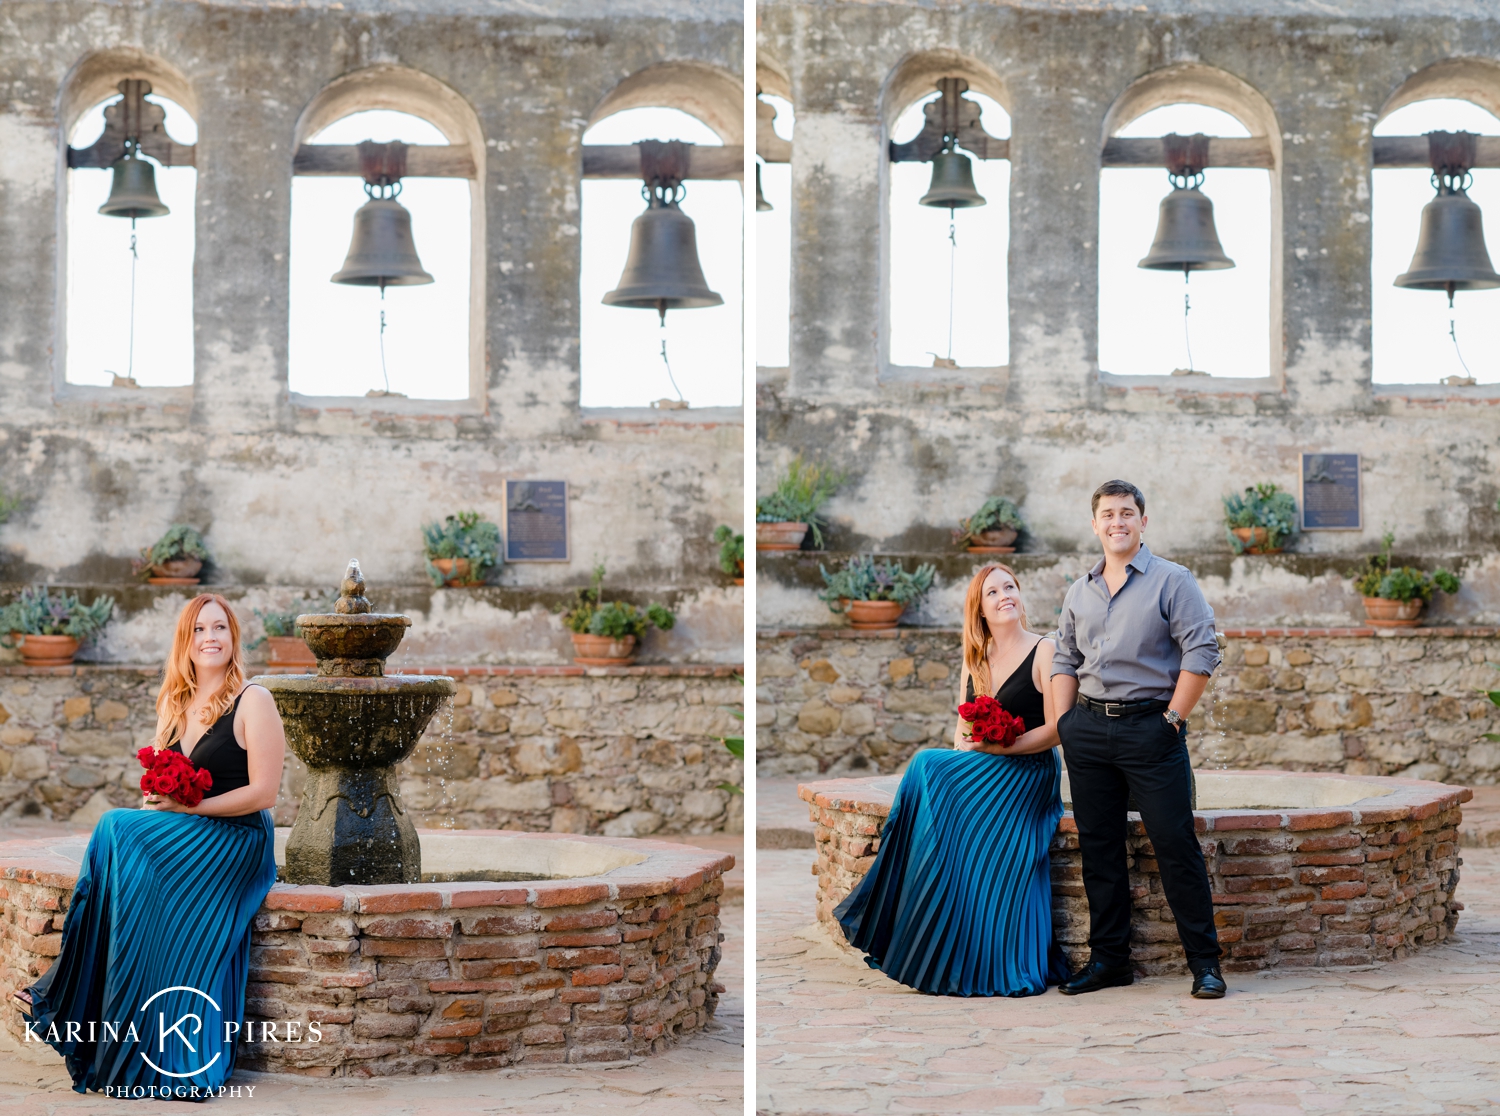 Engagement photography by Karina Pires Photography